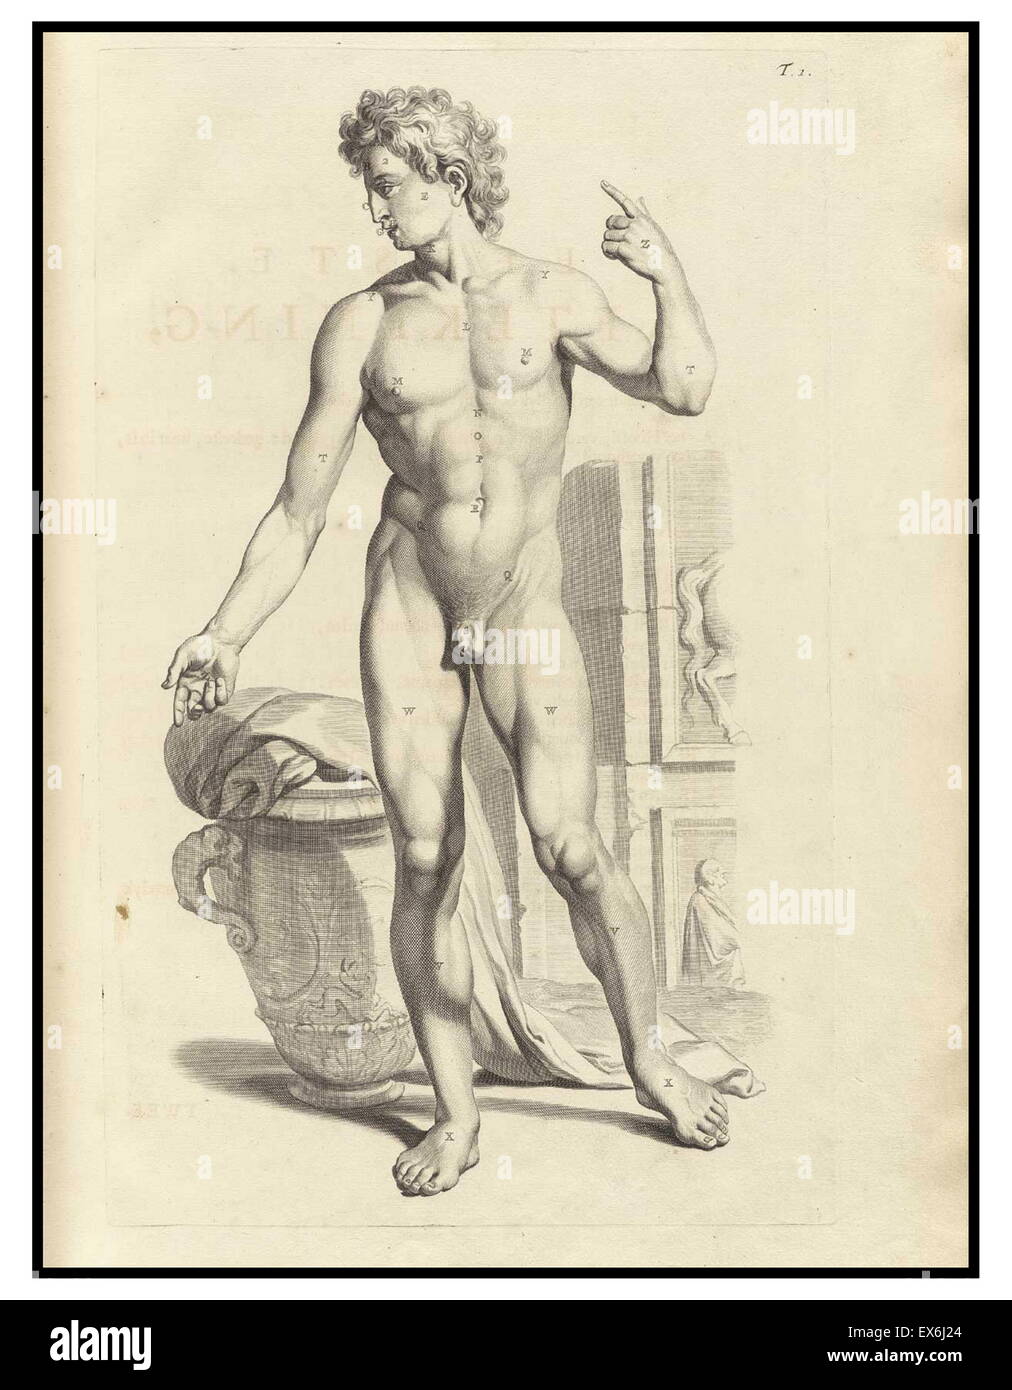 Illustrations by Govard Bidloo, from the anatomy textbook 'Ontleding des menschelyken Lichaams'. (Amsterdam 1690).Govard Bidloo was born in Amsterdam in 1649 and became professor of anatomy at The Hague from 1688 to 1713 Stock Photo